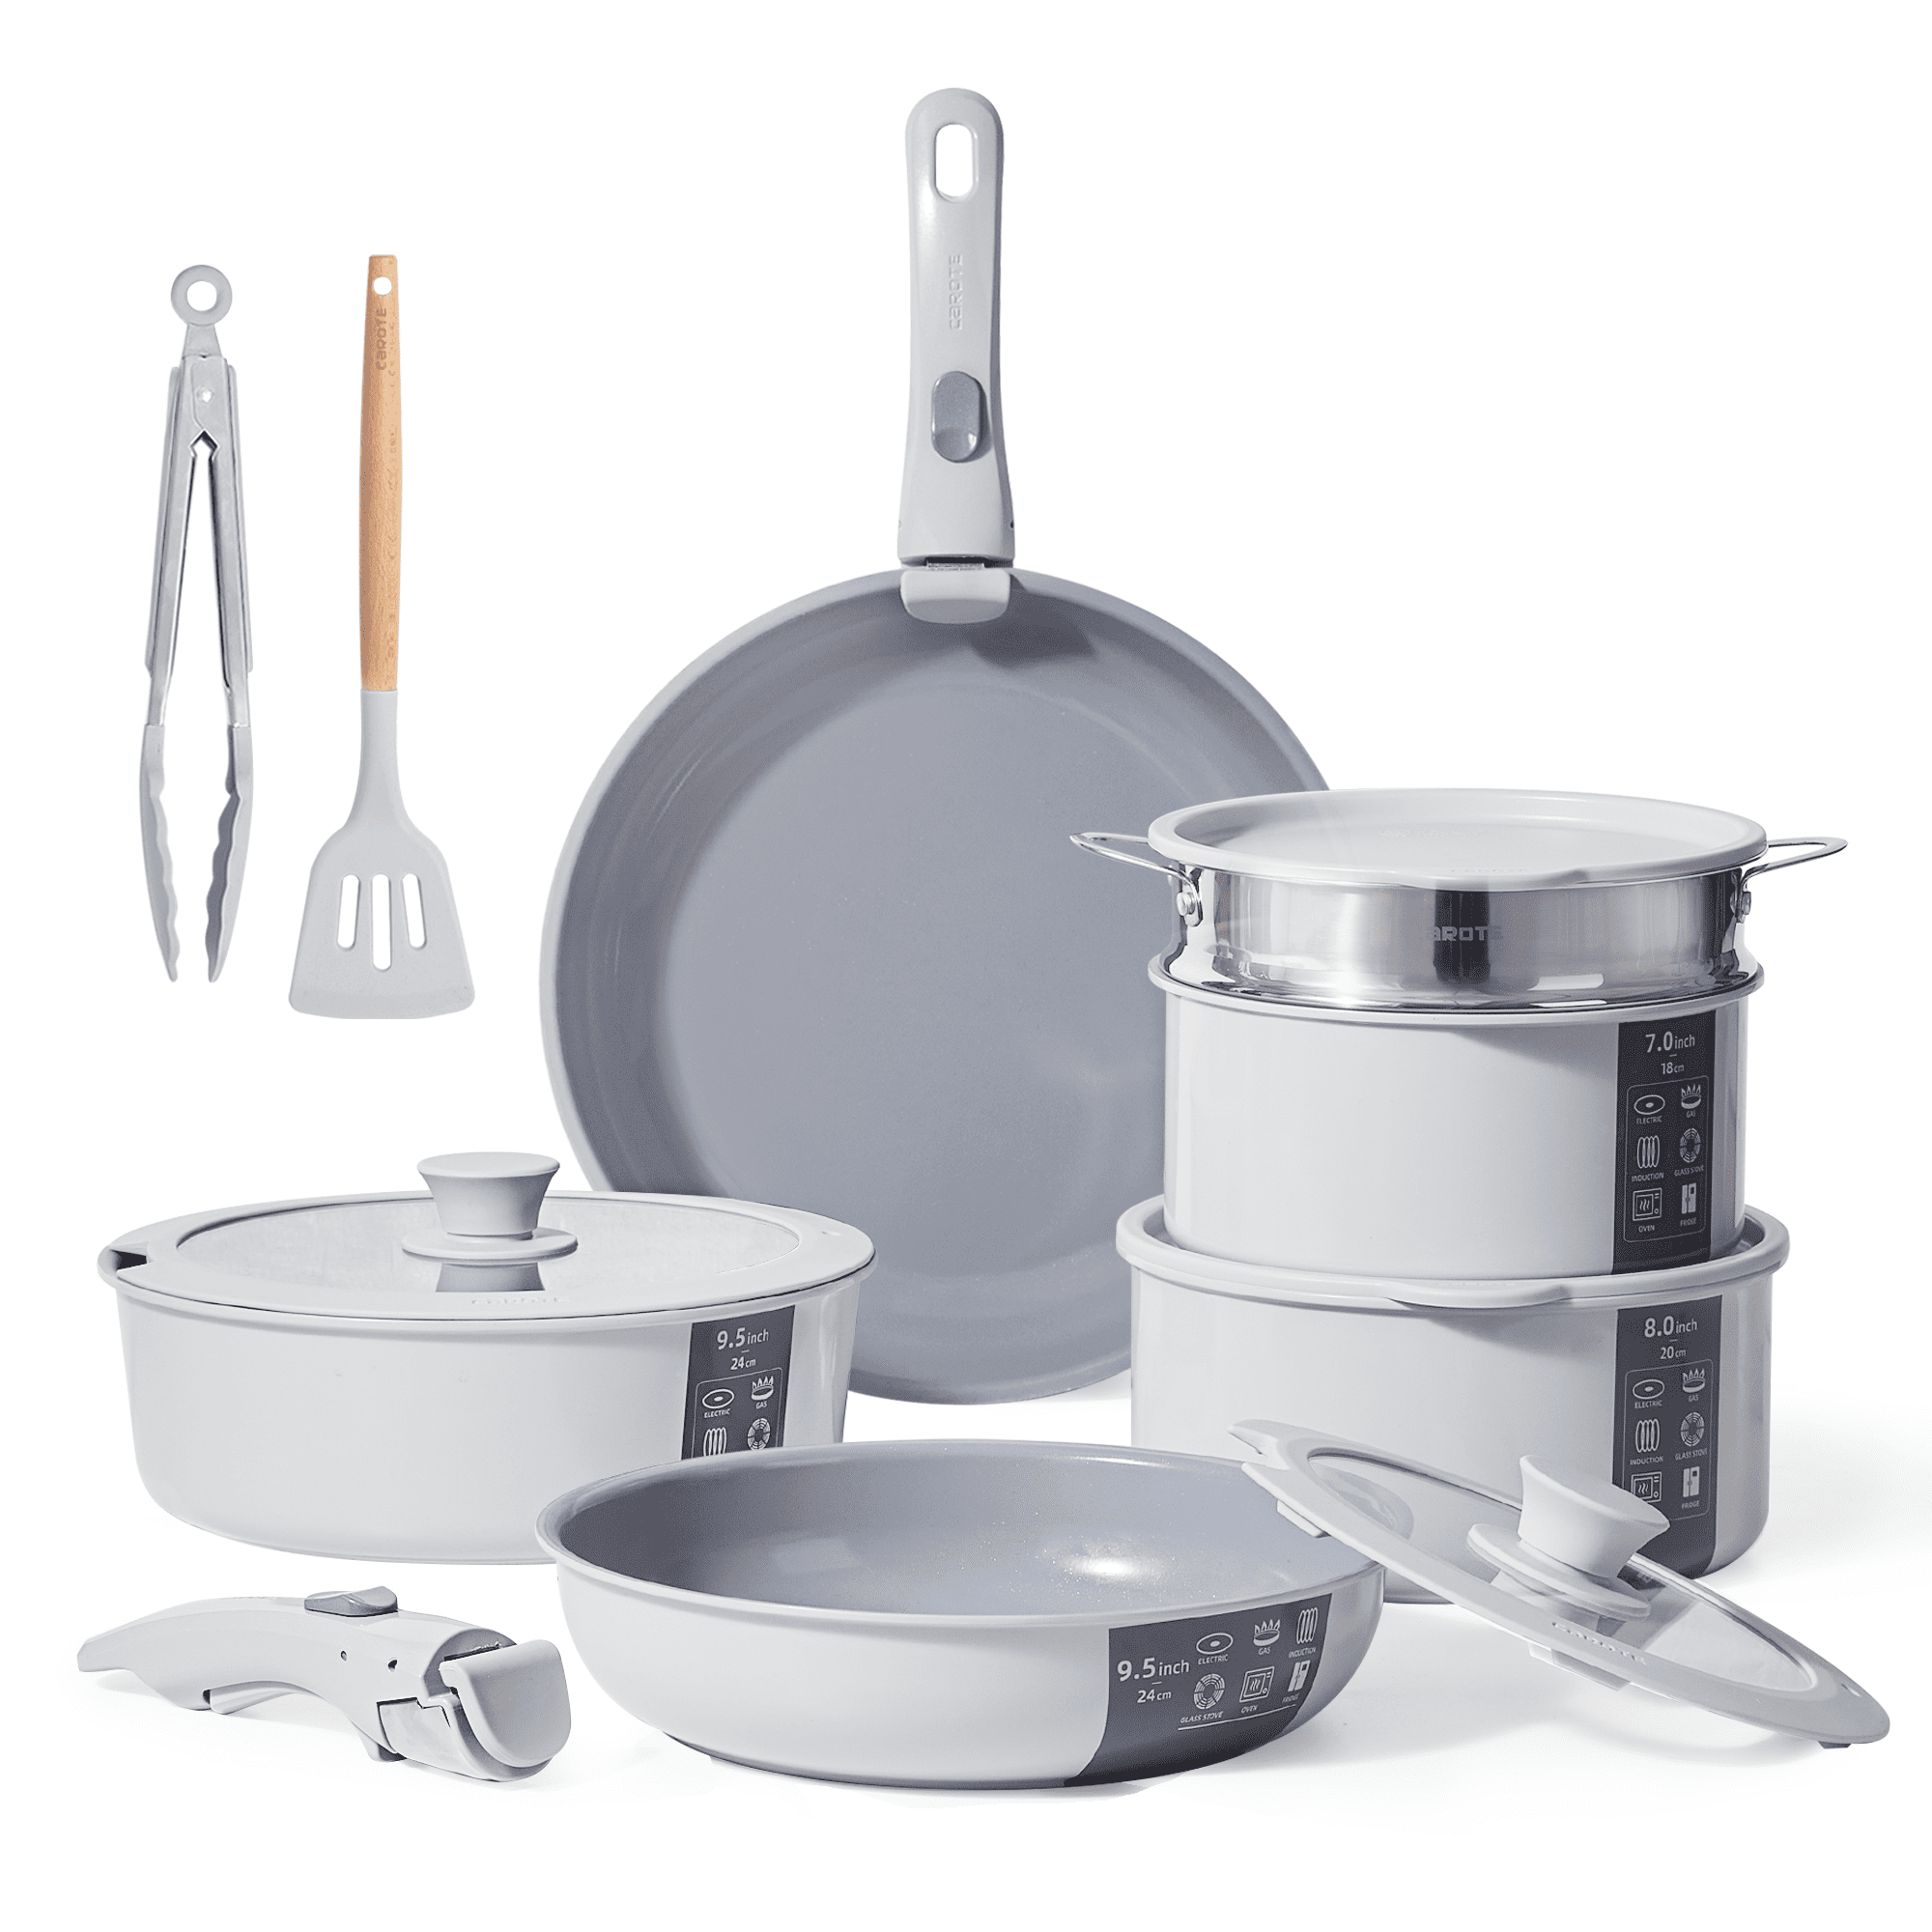 5-PC Carote Granite Nonstick Cookware Set: 8 Frying Pan, 11 Frying Pan,  1.5 Quart Saucepan w/ Lid, Glass Lid w/ Silicone Ring, & Removable Handle  $40 + FS